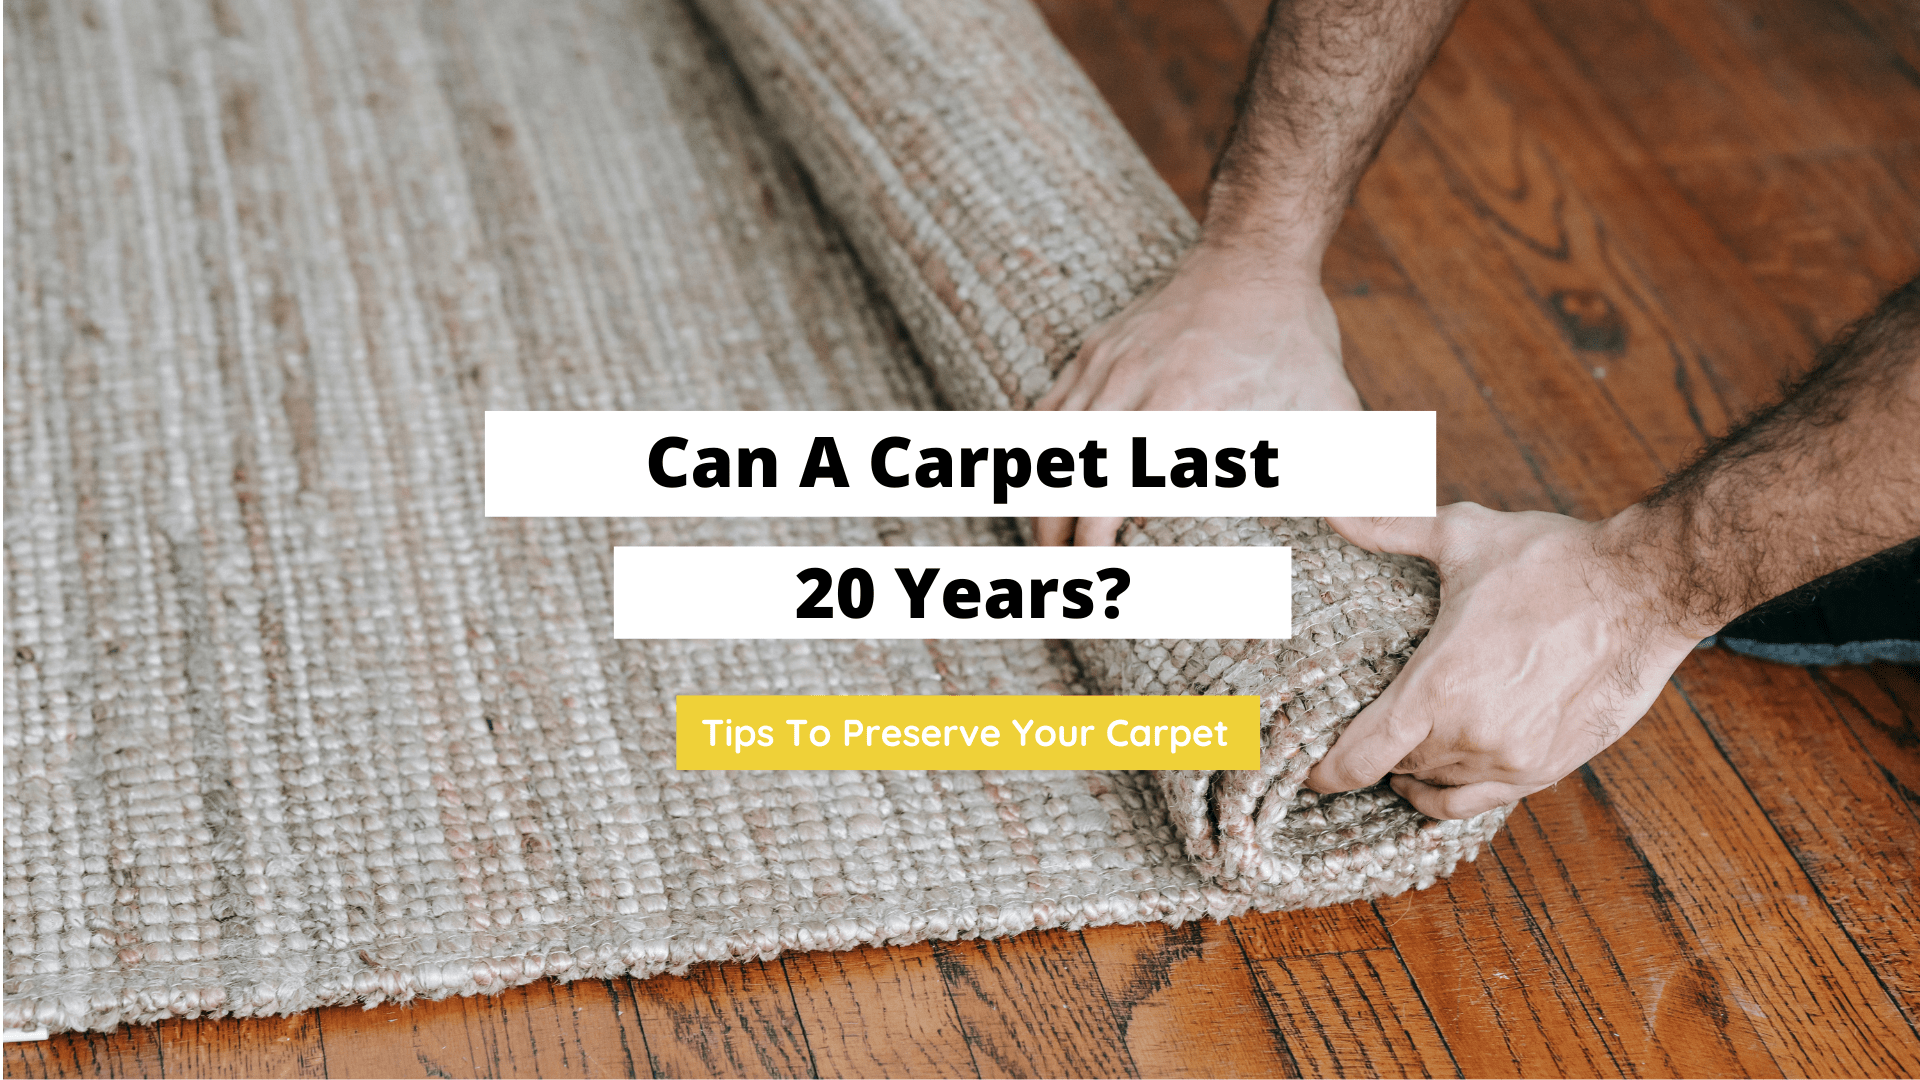 do carpets last 20 years, how many years can a carpet last, do carpets last 20 years